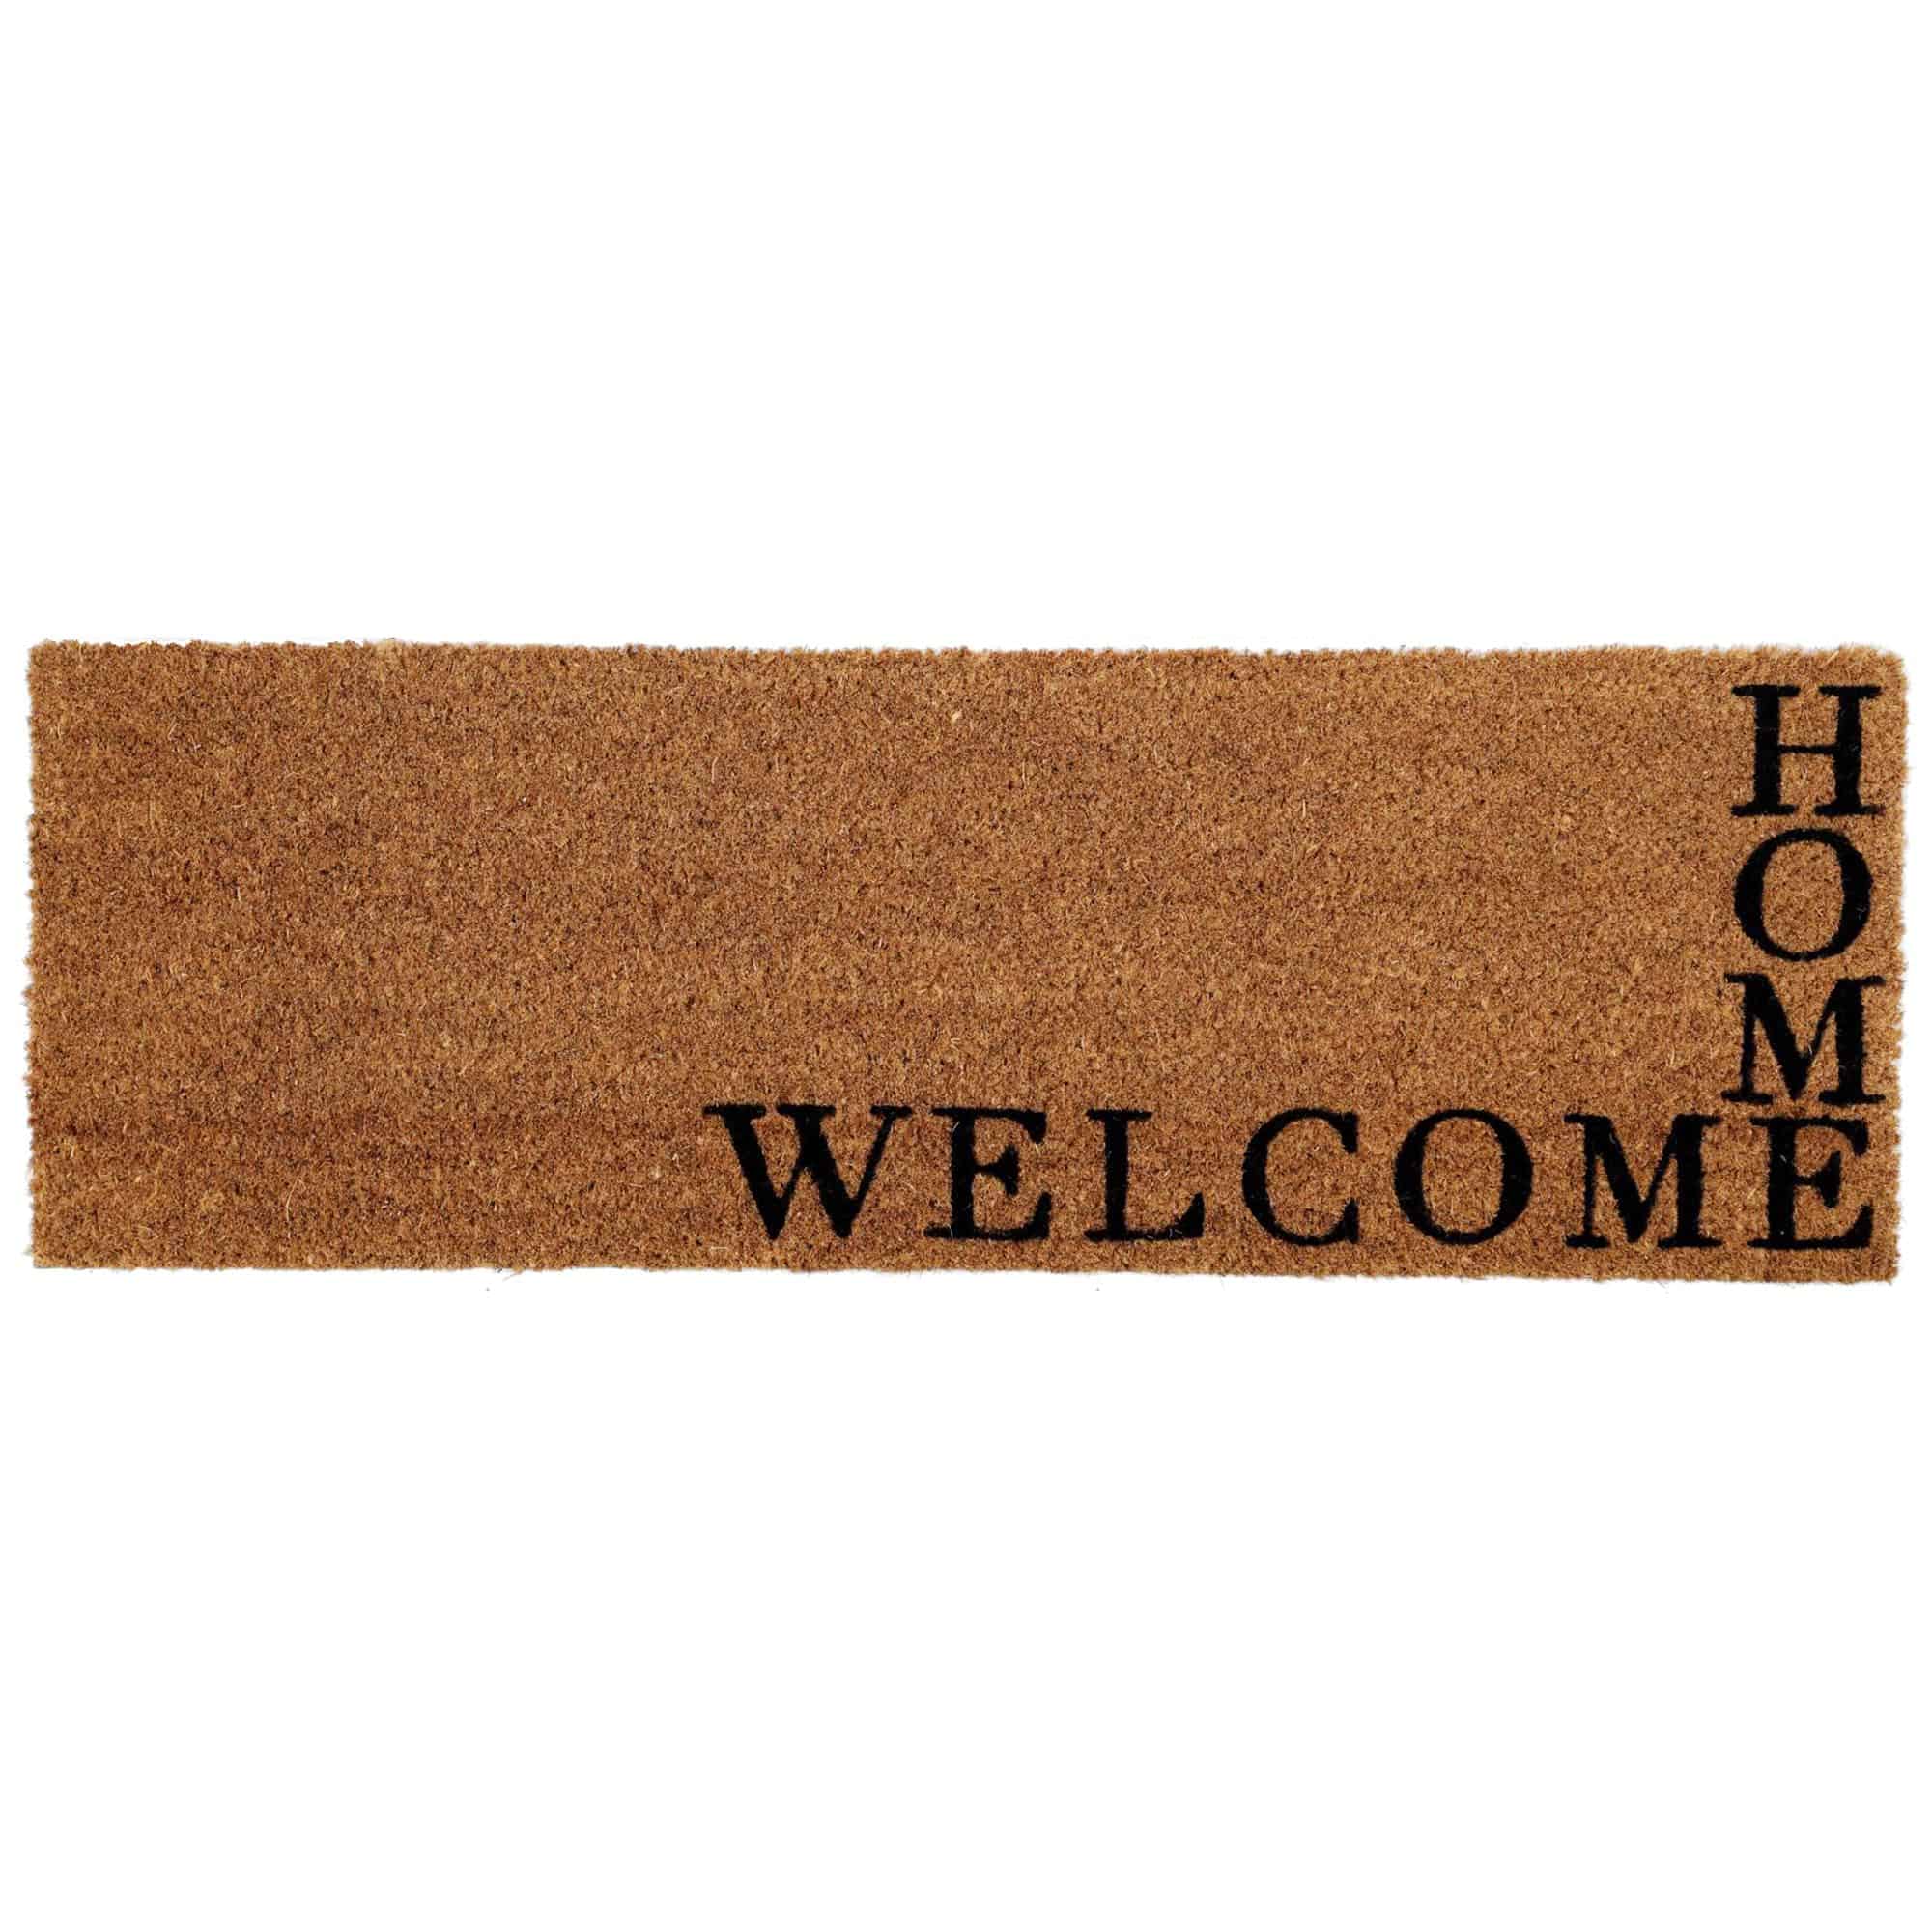 Welcome Home 30" x 10" Sheltered Long Front Door Mat Coco Coir Fibers Natural Color